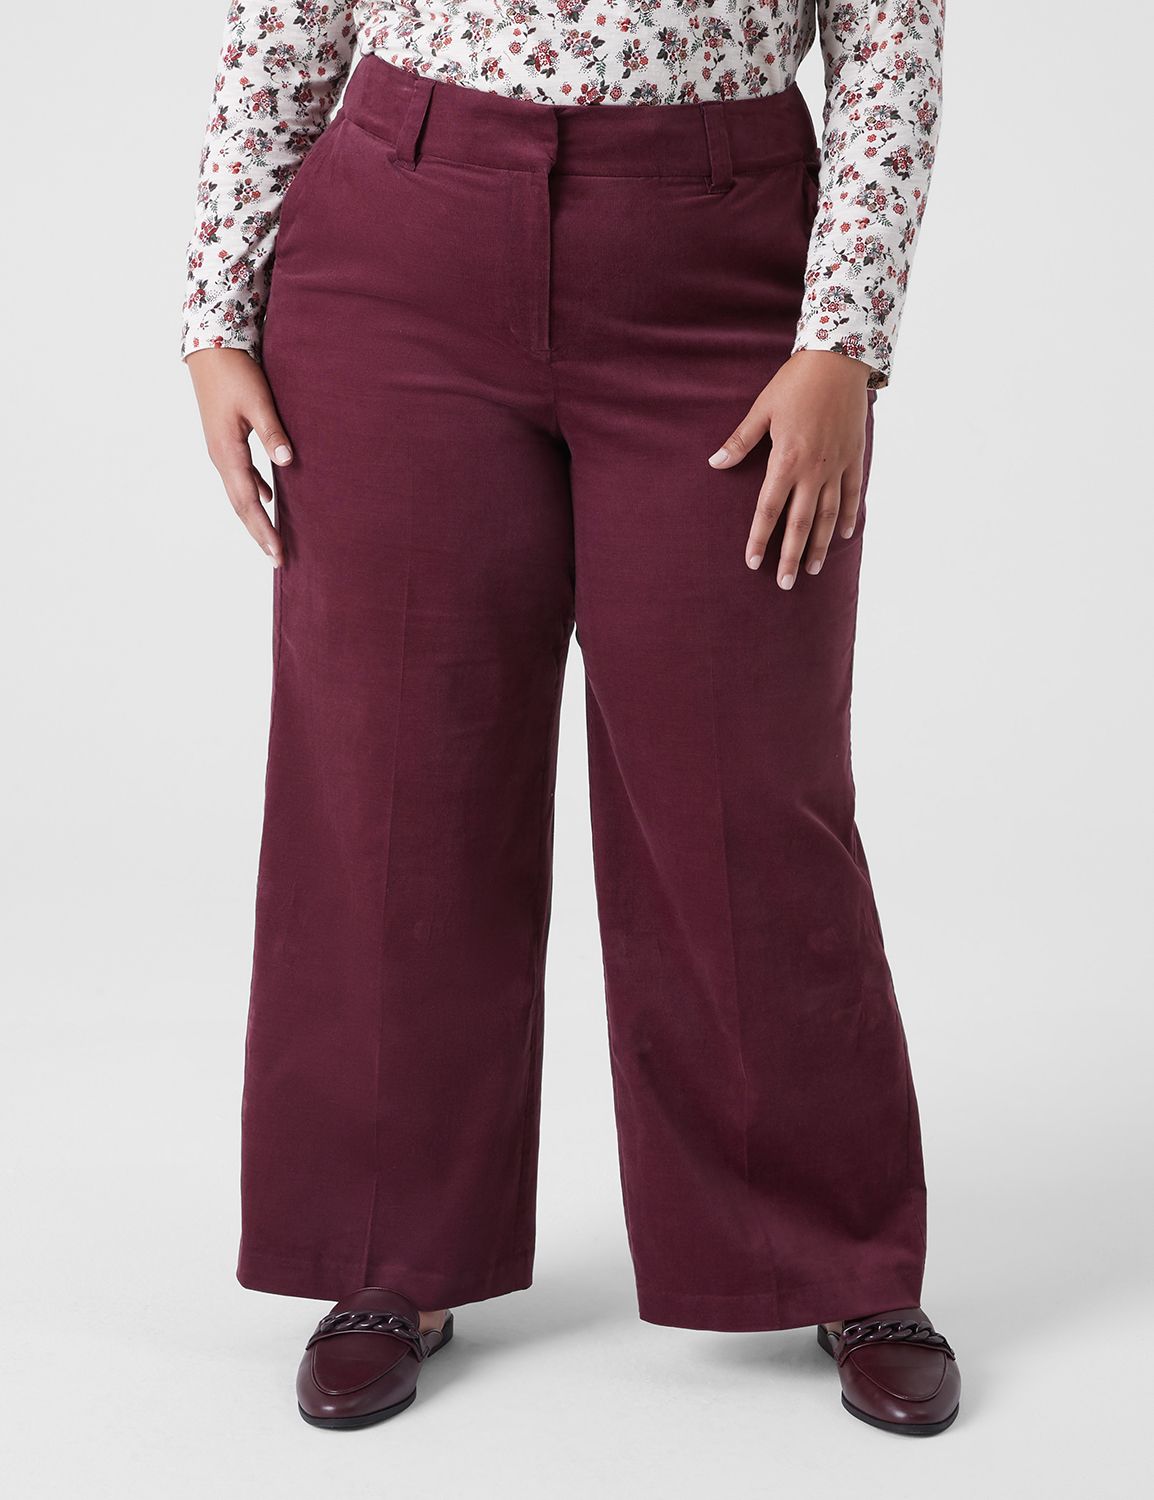 Hit A Cord - Flared Trousers for Women